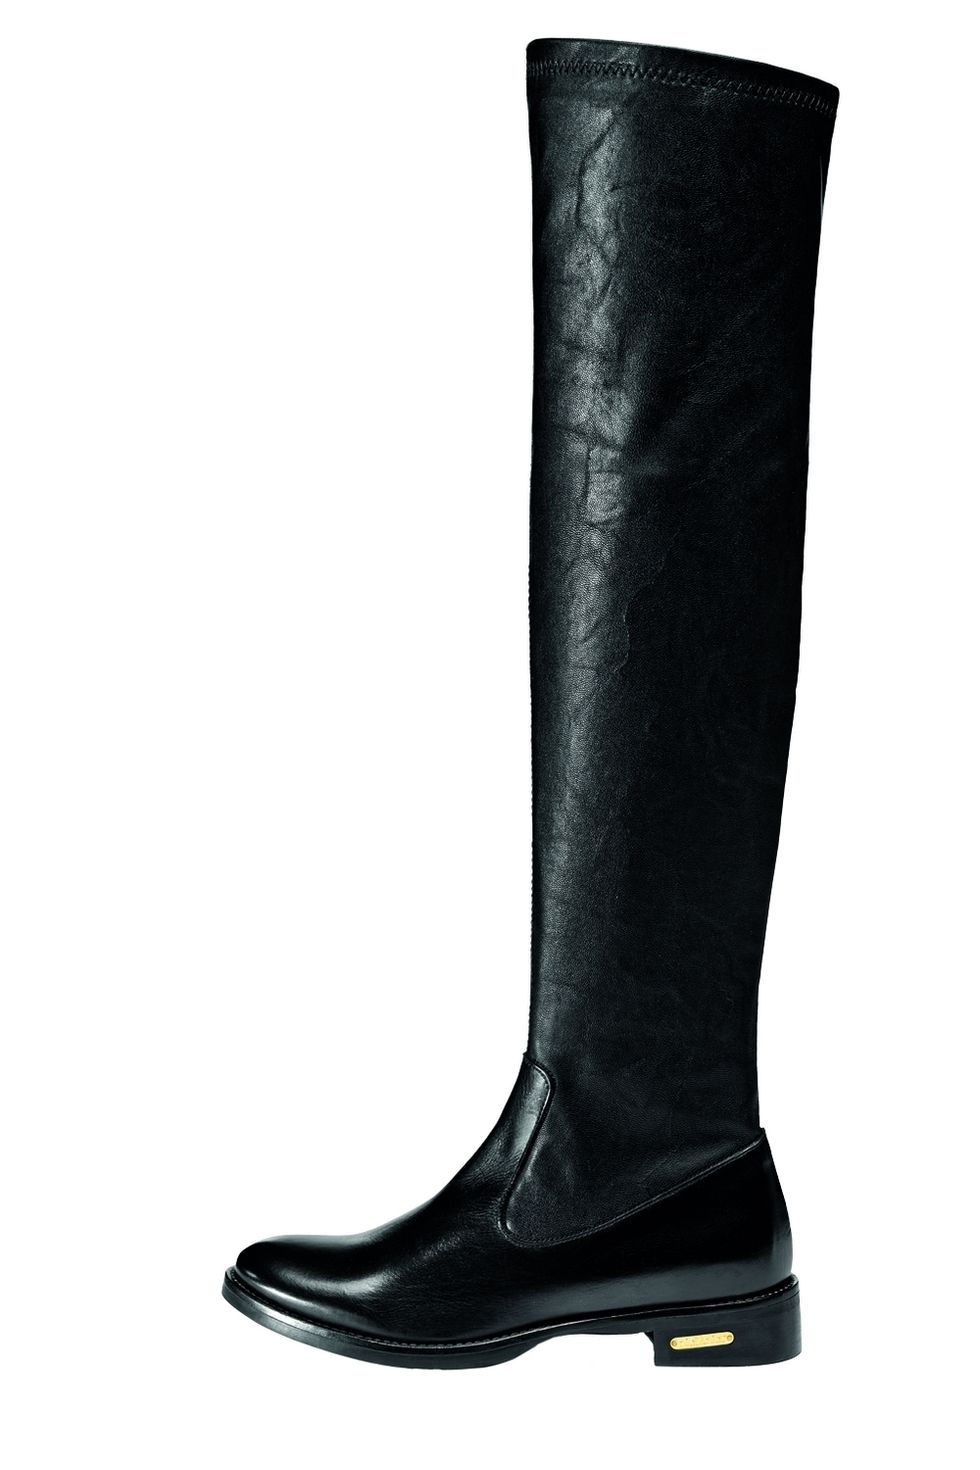 Footwear, Brown, Boot, Shoe, Riding boot, Leather, Knee-high boot, Black, Tan, Liver, 